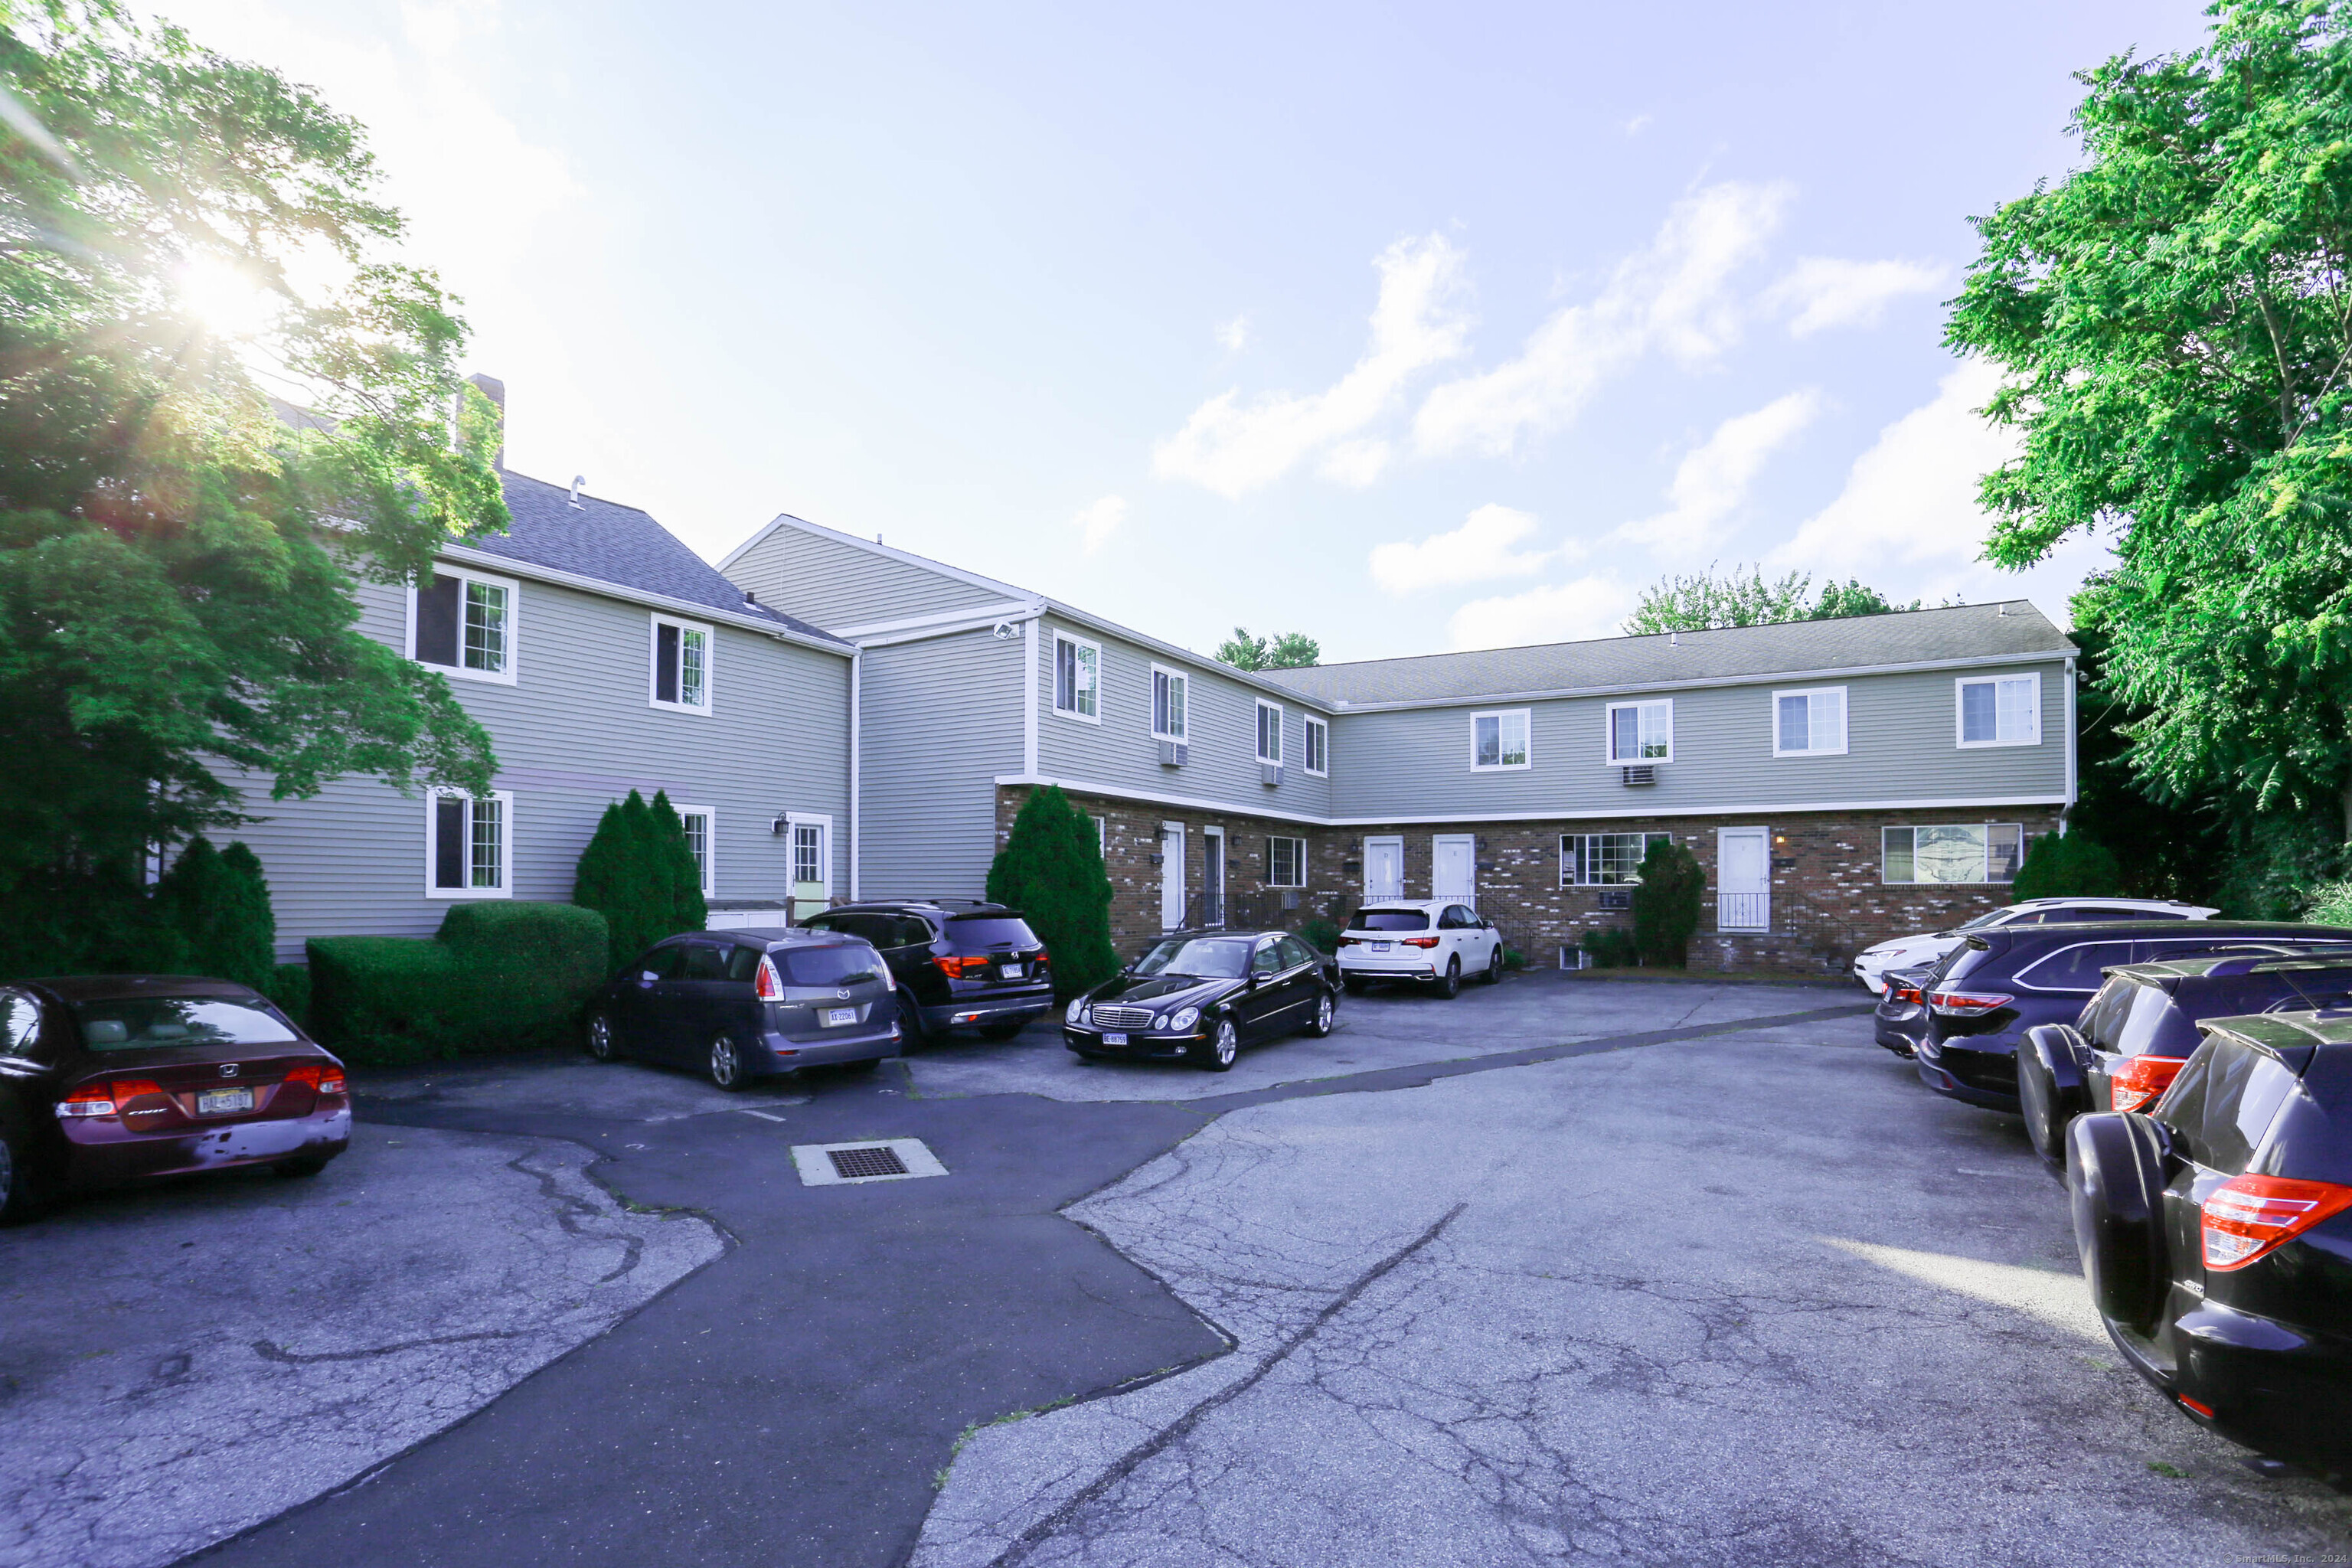 View Stamford, CT 06902 townhome